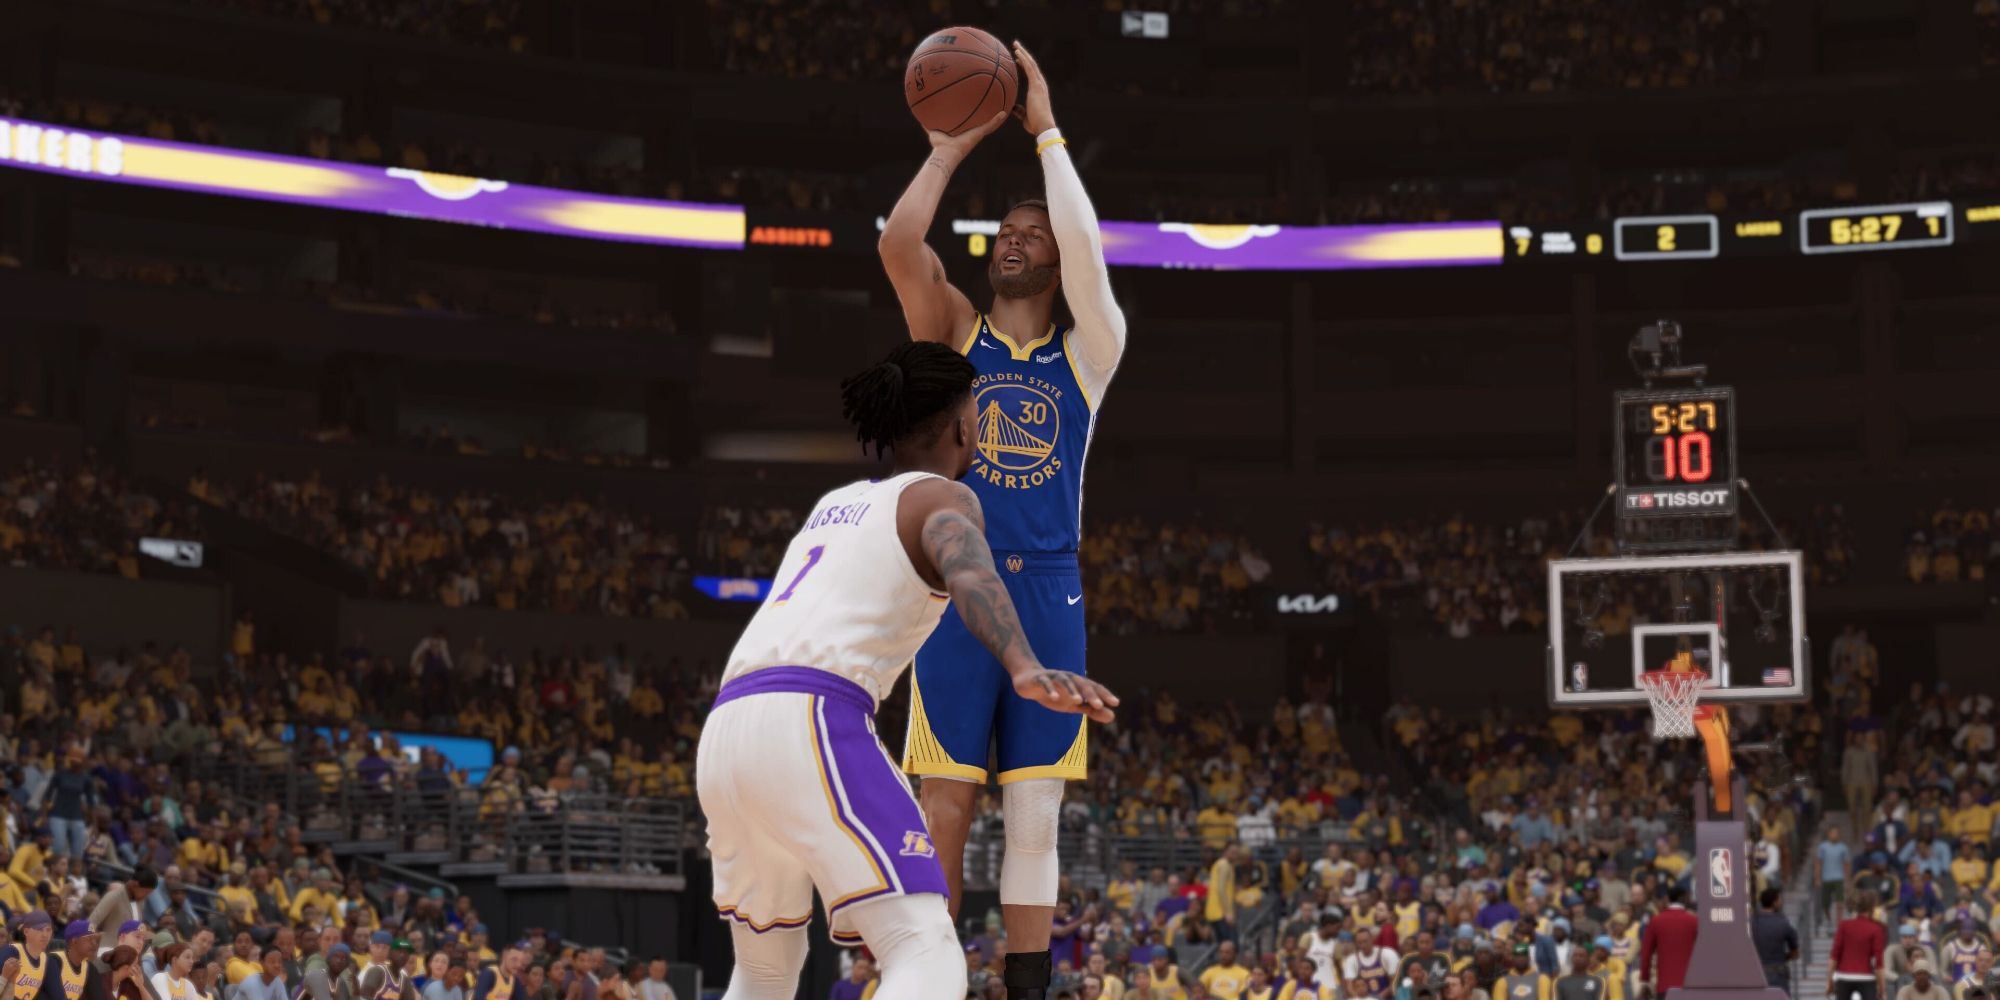 Steph Curry of the Golden State Warriors performing a 3 point shot in NBA 2K23